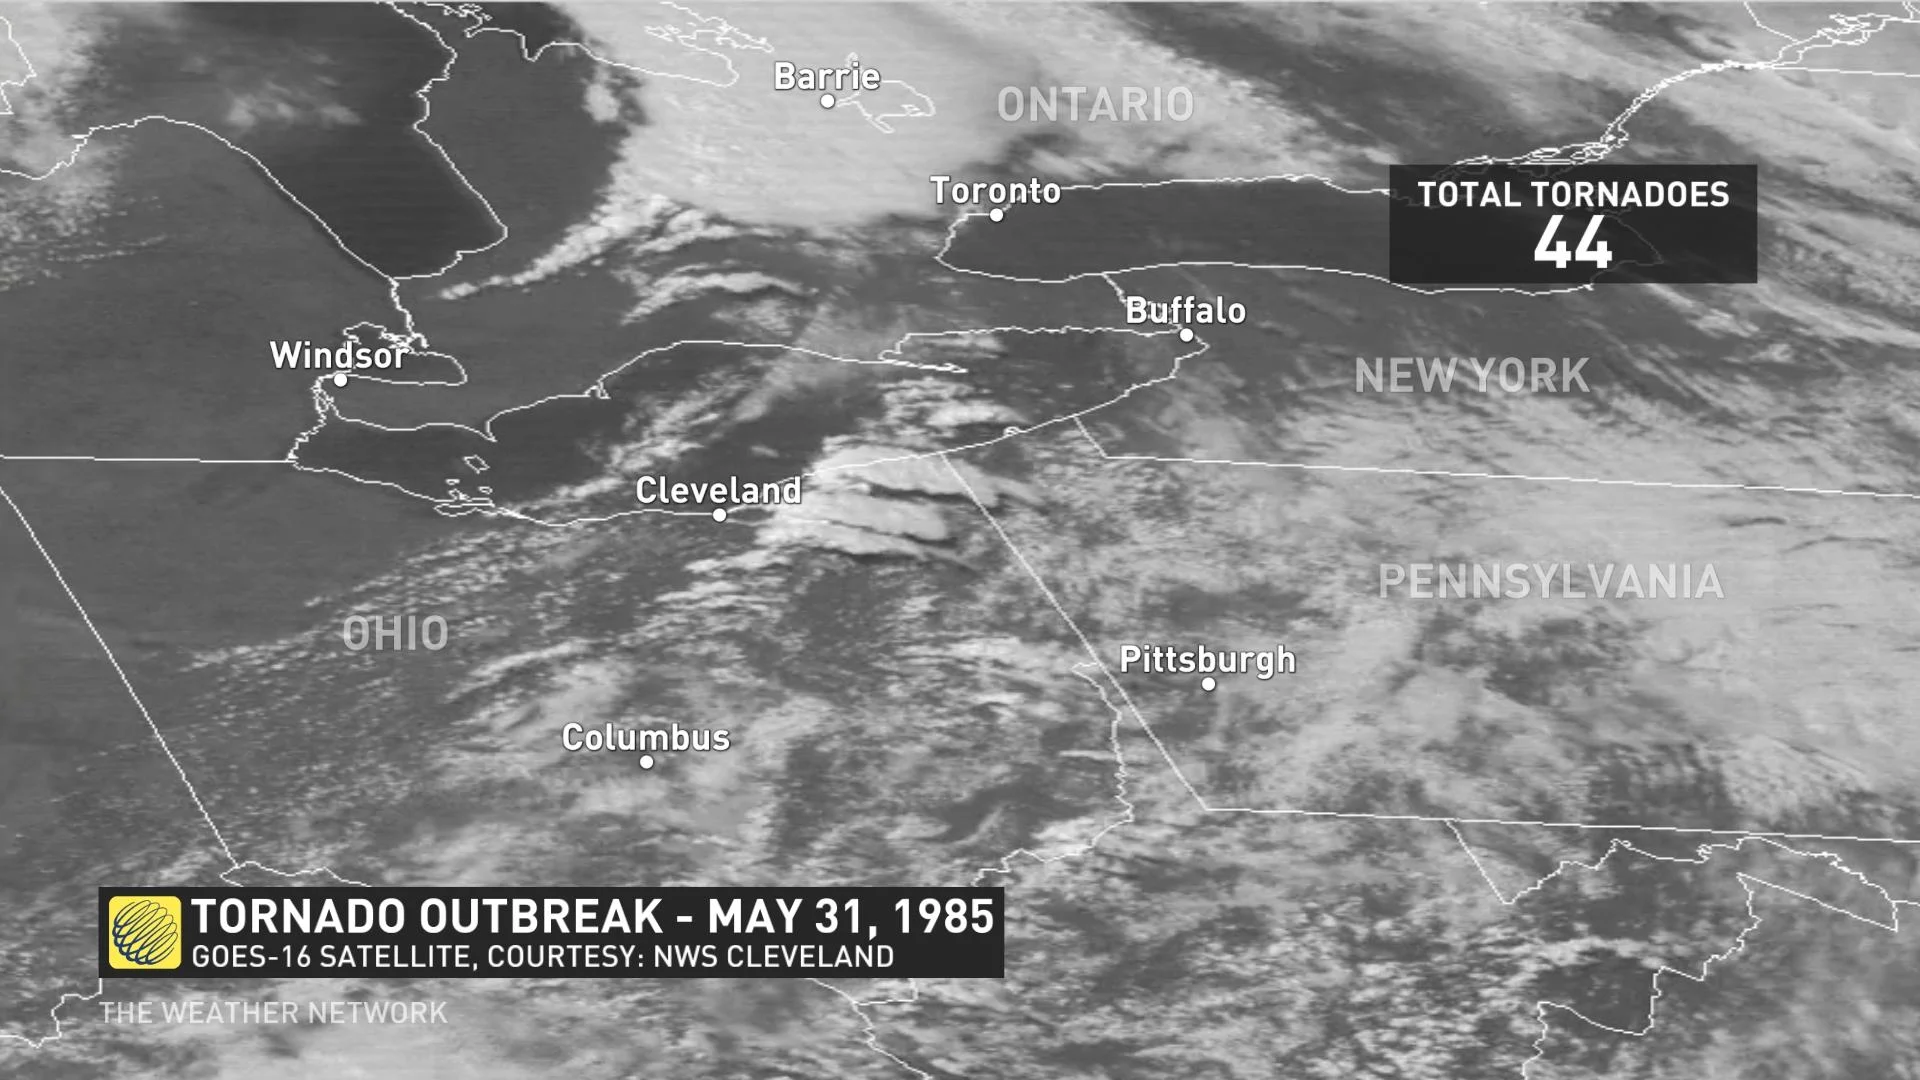 GOES-16 satellite imagery of the May 31, 1985 outbreak